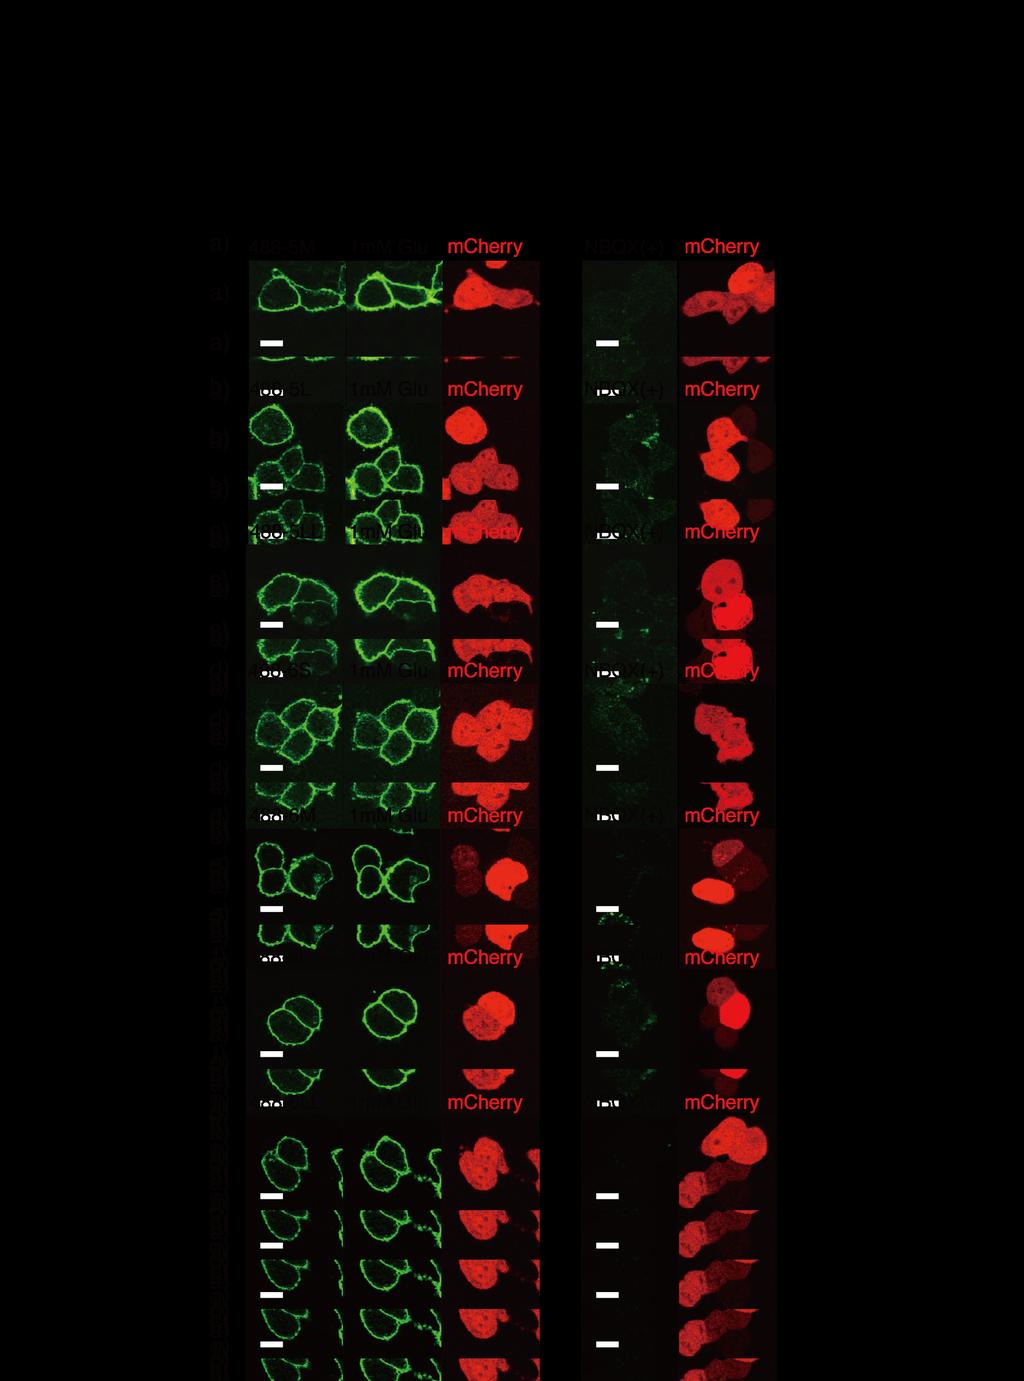 Figure S2 Confocal live imaging of labeled AMPARs by a series of CAM2(Ax488) derivatives in